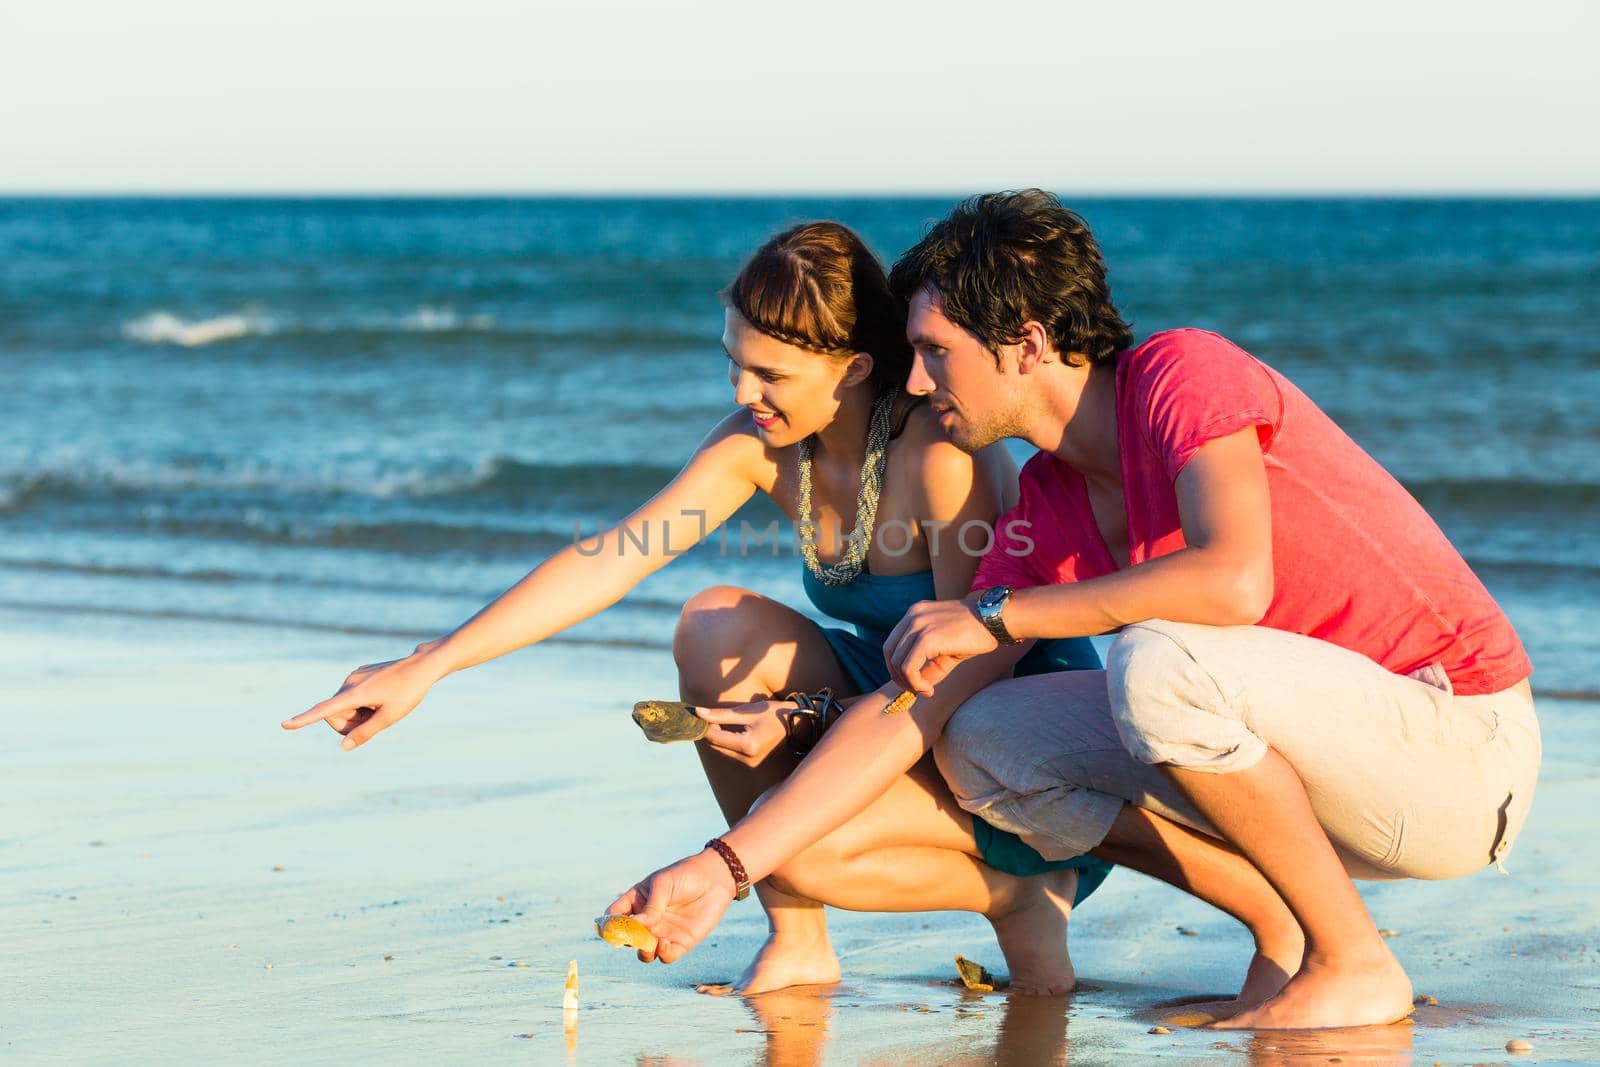 Man and woman, couple, enjoying the romantic sunset on a beach by the ocean in their vacation, they searching shells